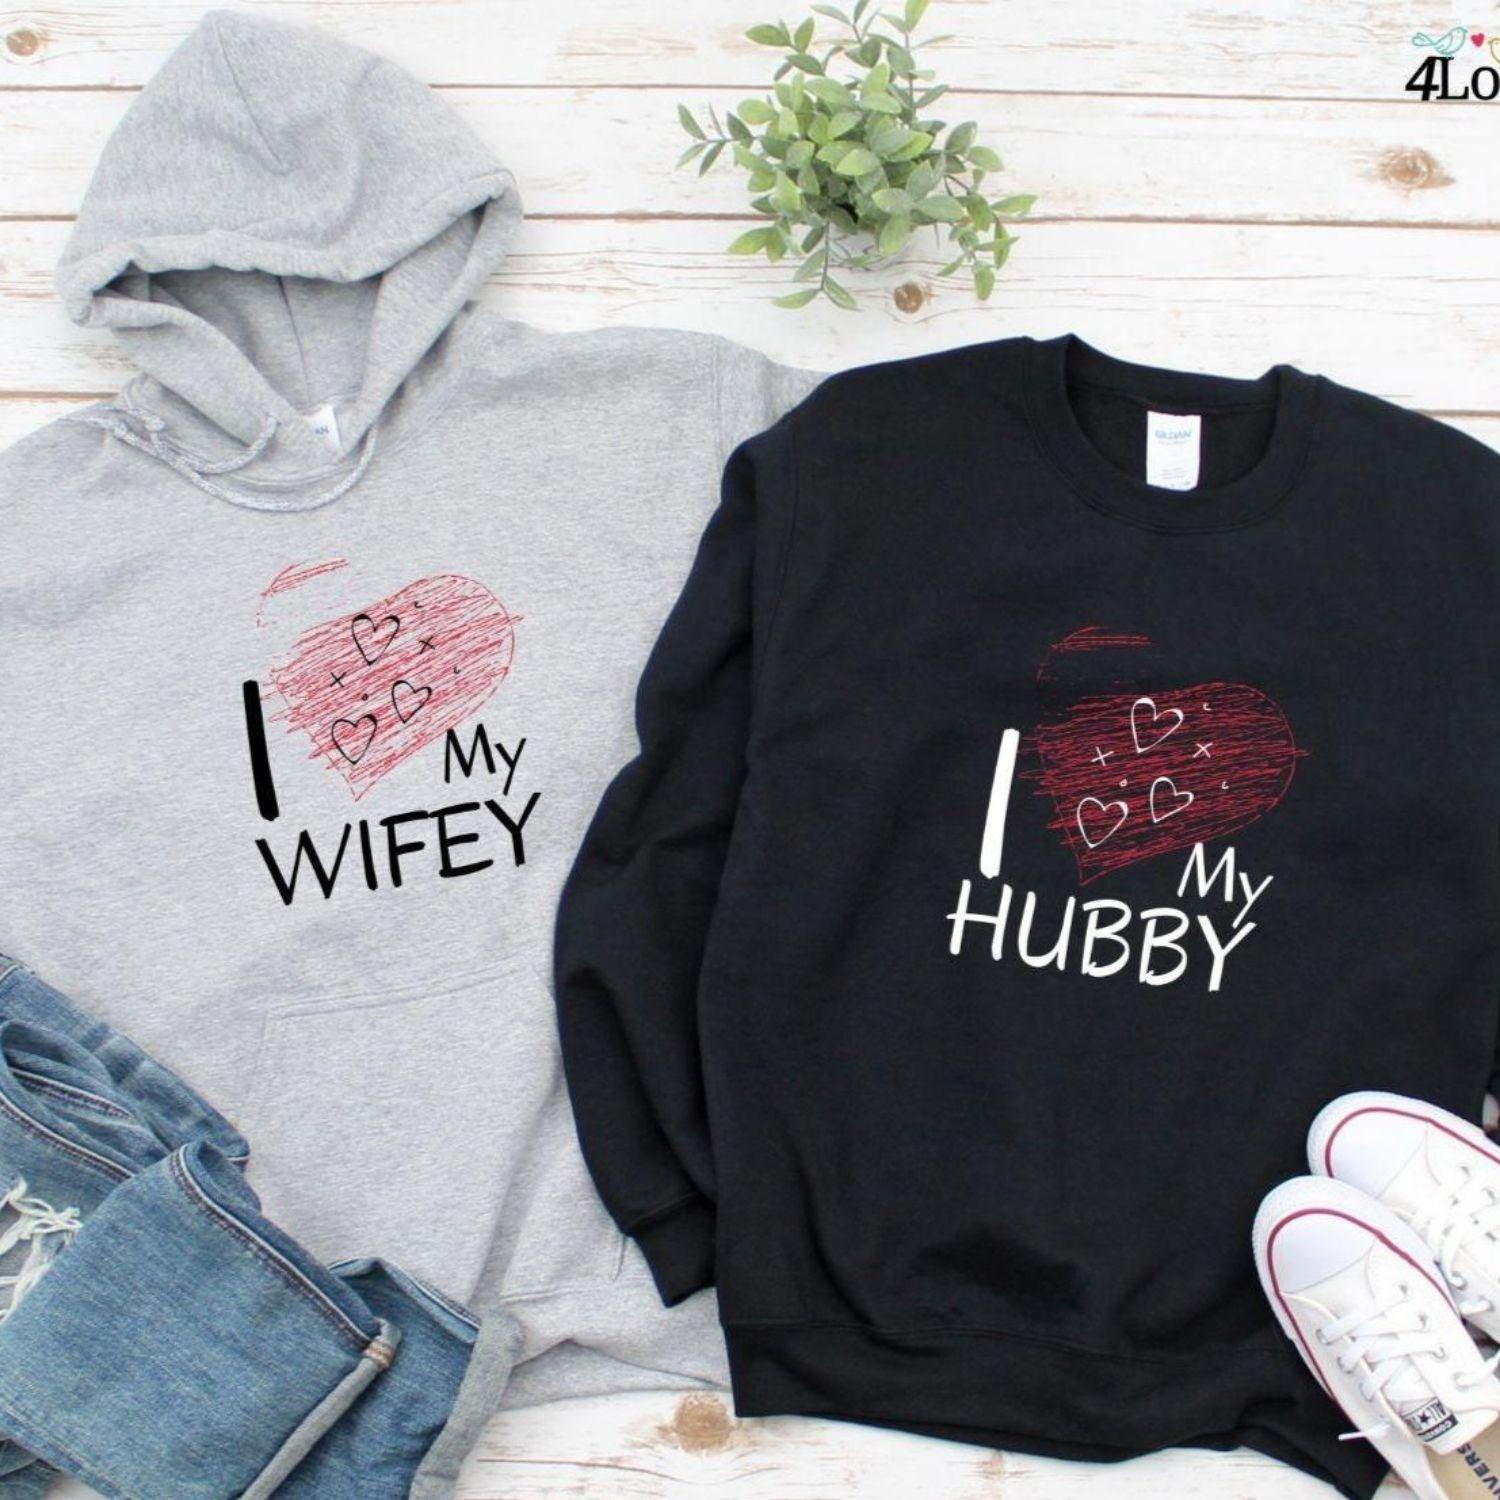 I Love My Wifey and Hubby Themed Complementary Matching Outfits Set - 4Lovebirds